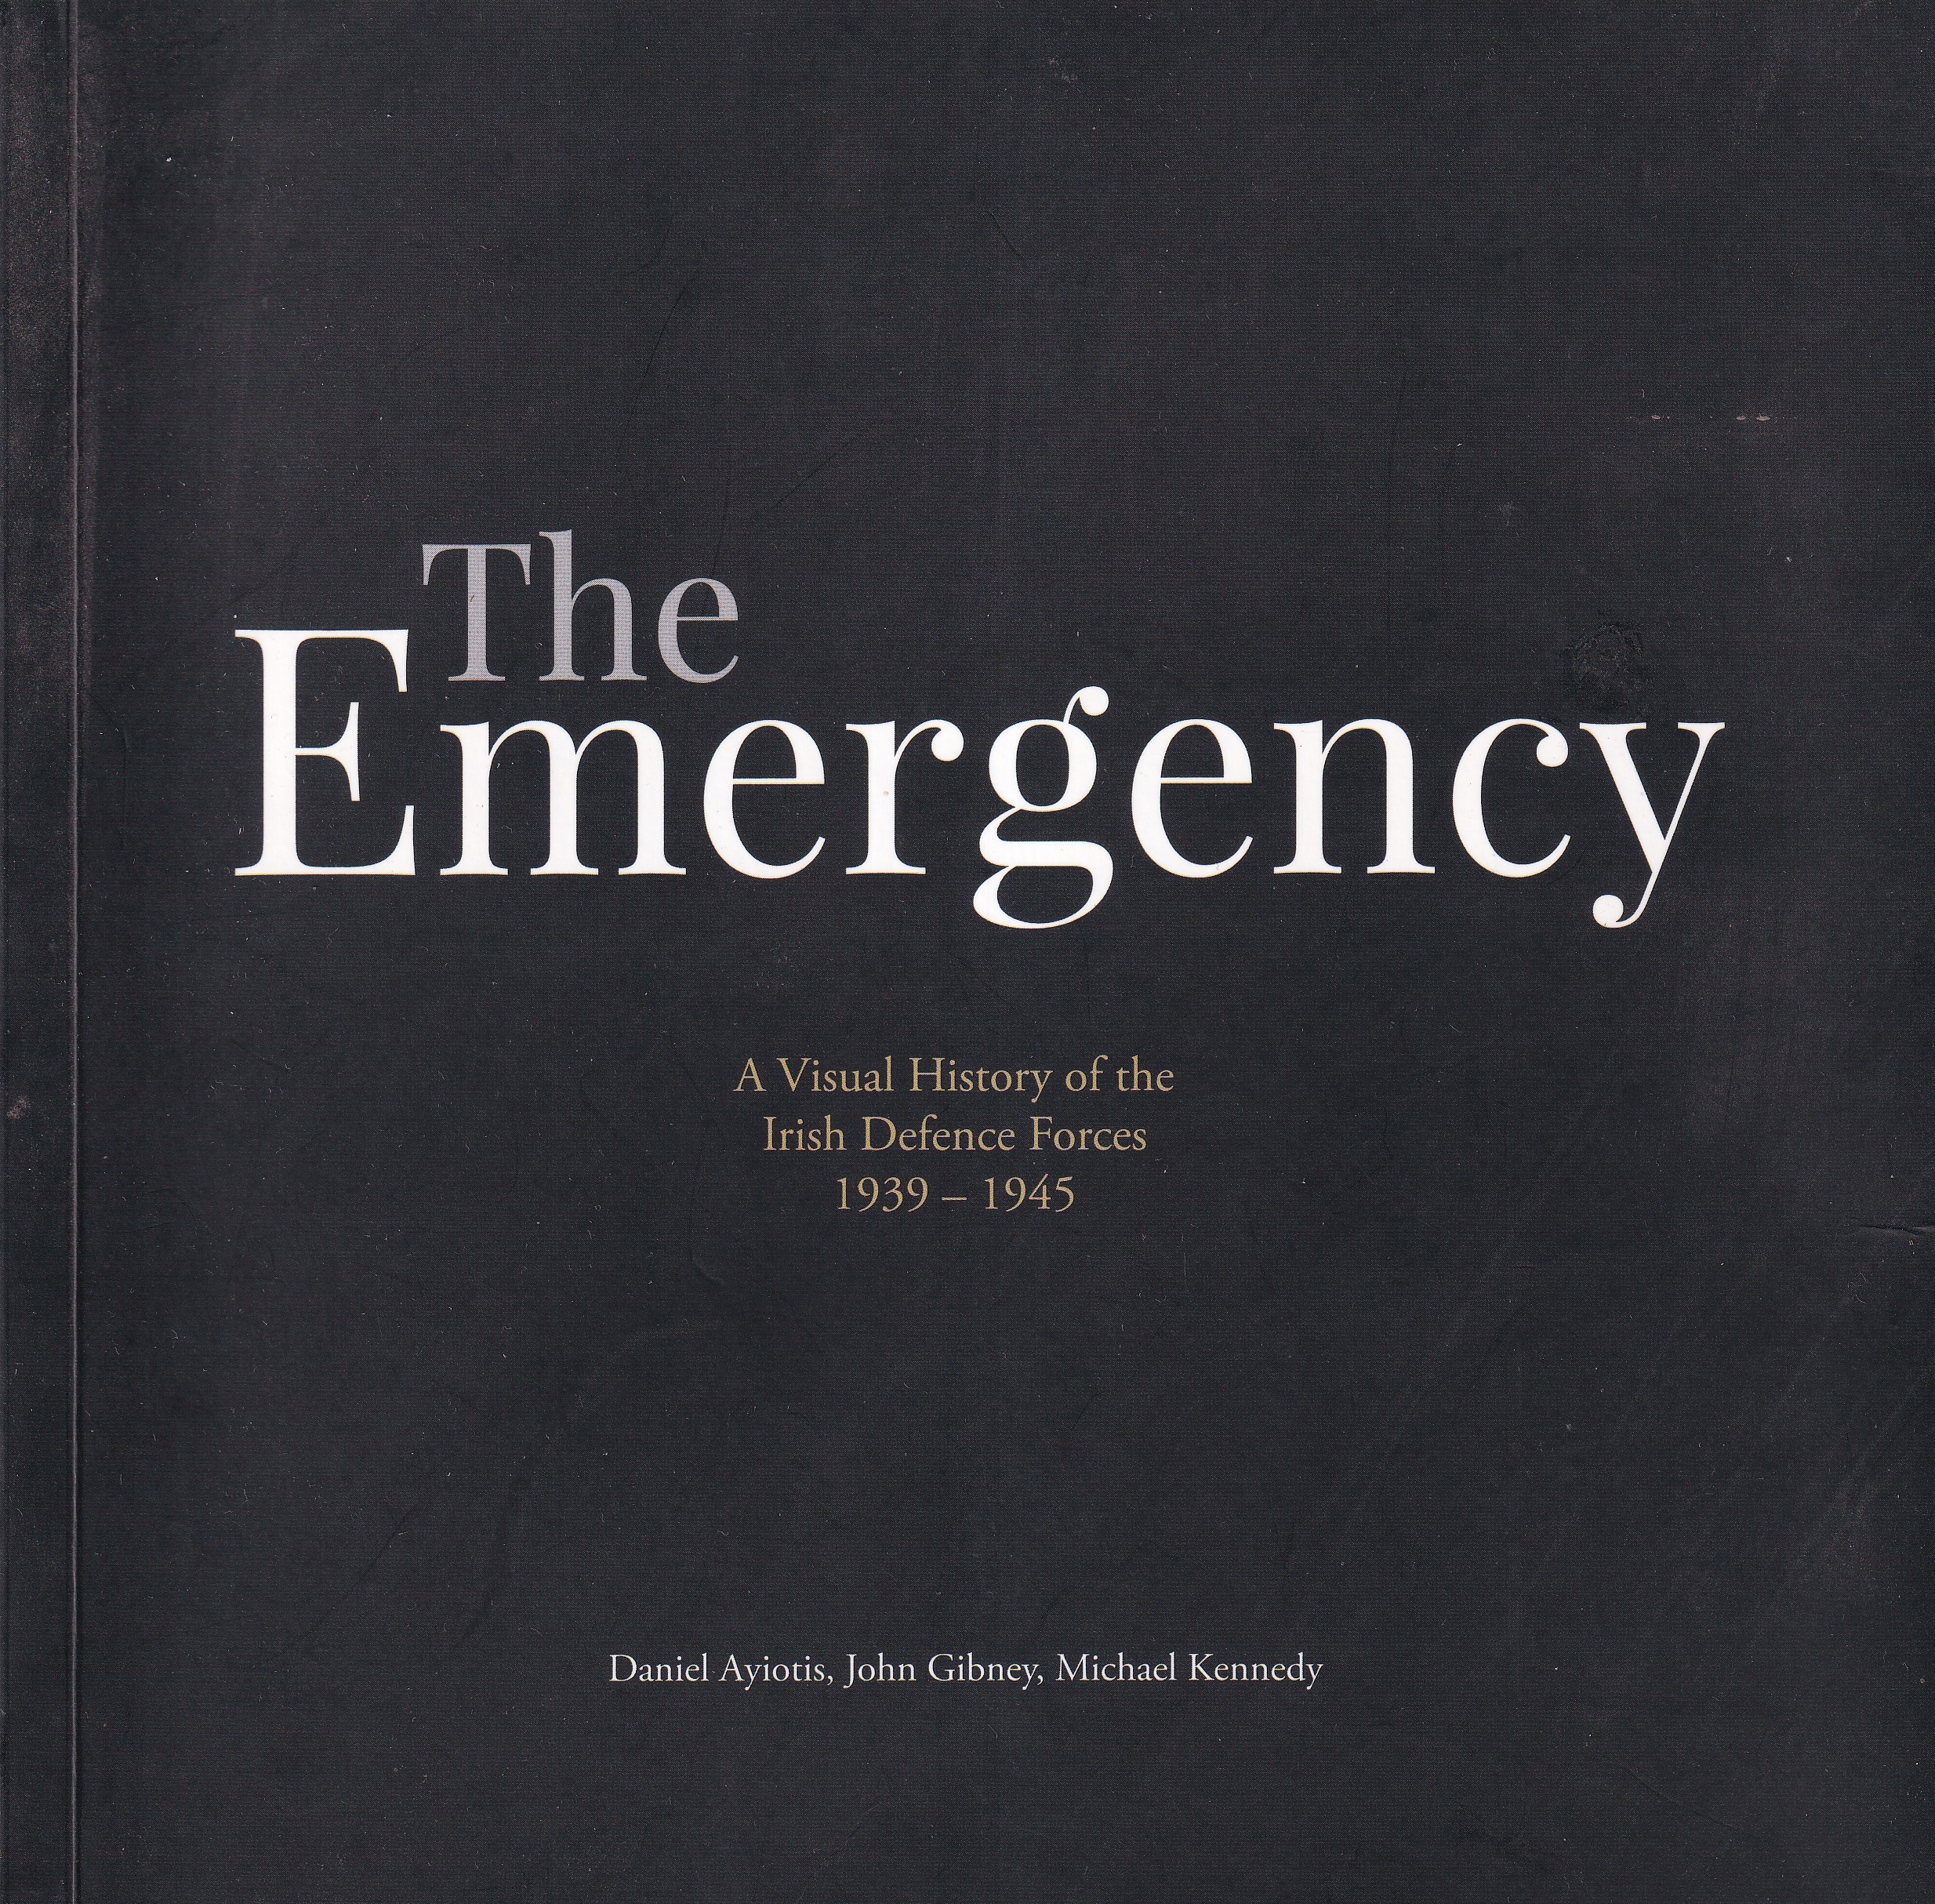 The Emergency: A Visual History of the Irish Defence Forces 1939-1945 by Daniel Ayiotis, John Gibney and Michael Kennedy